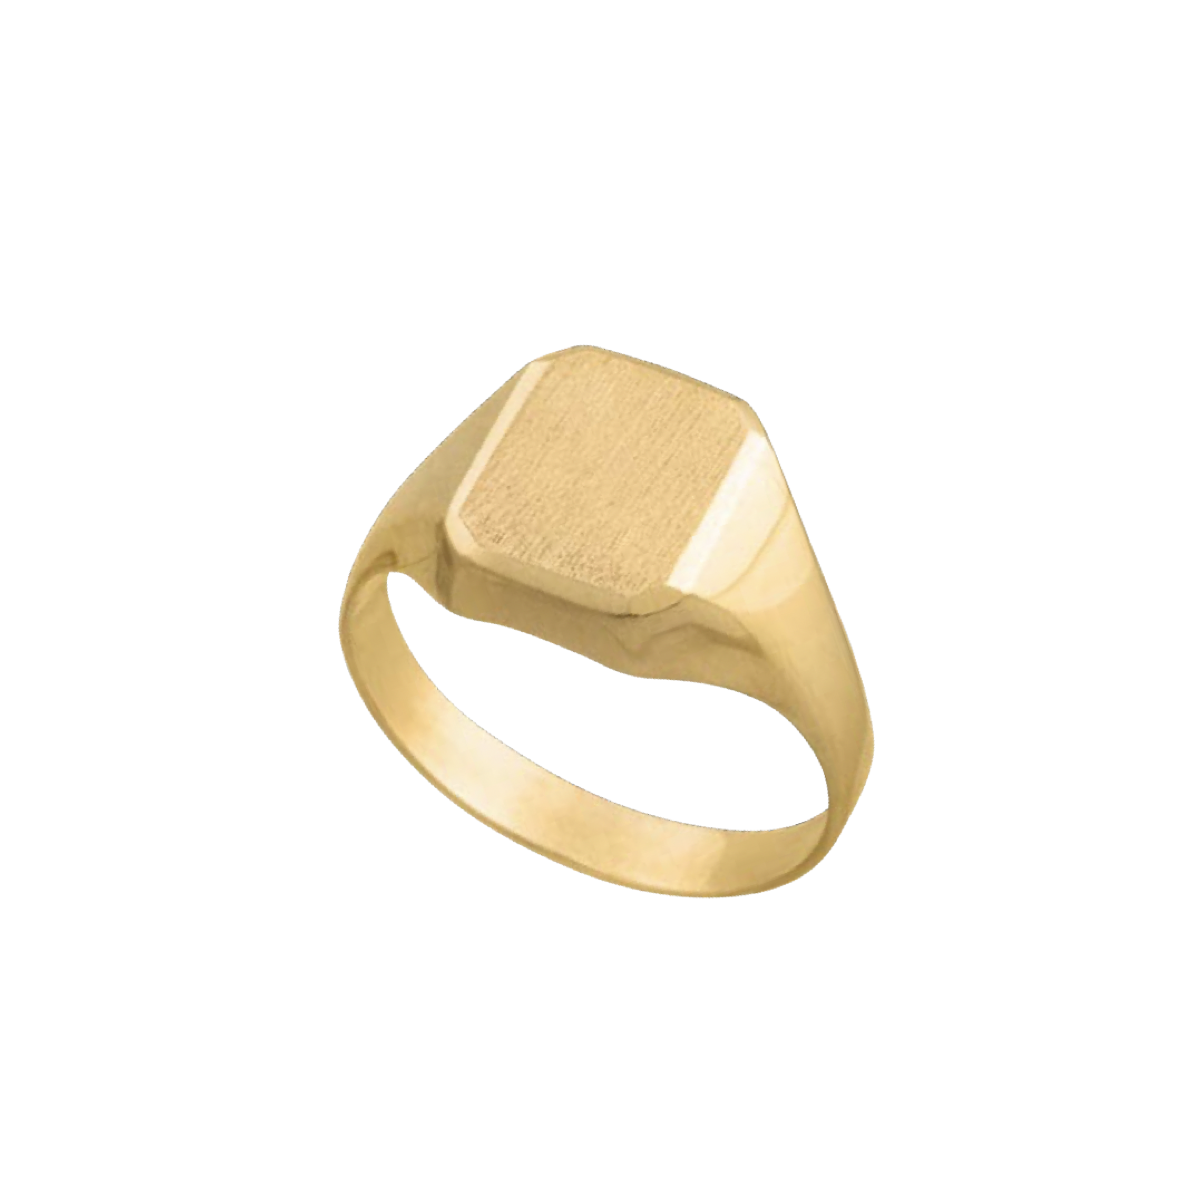 The Charles Gold Signet Ring